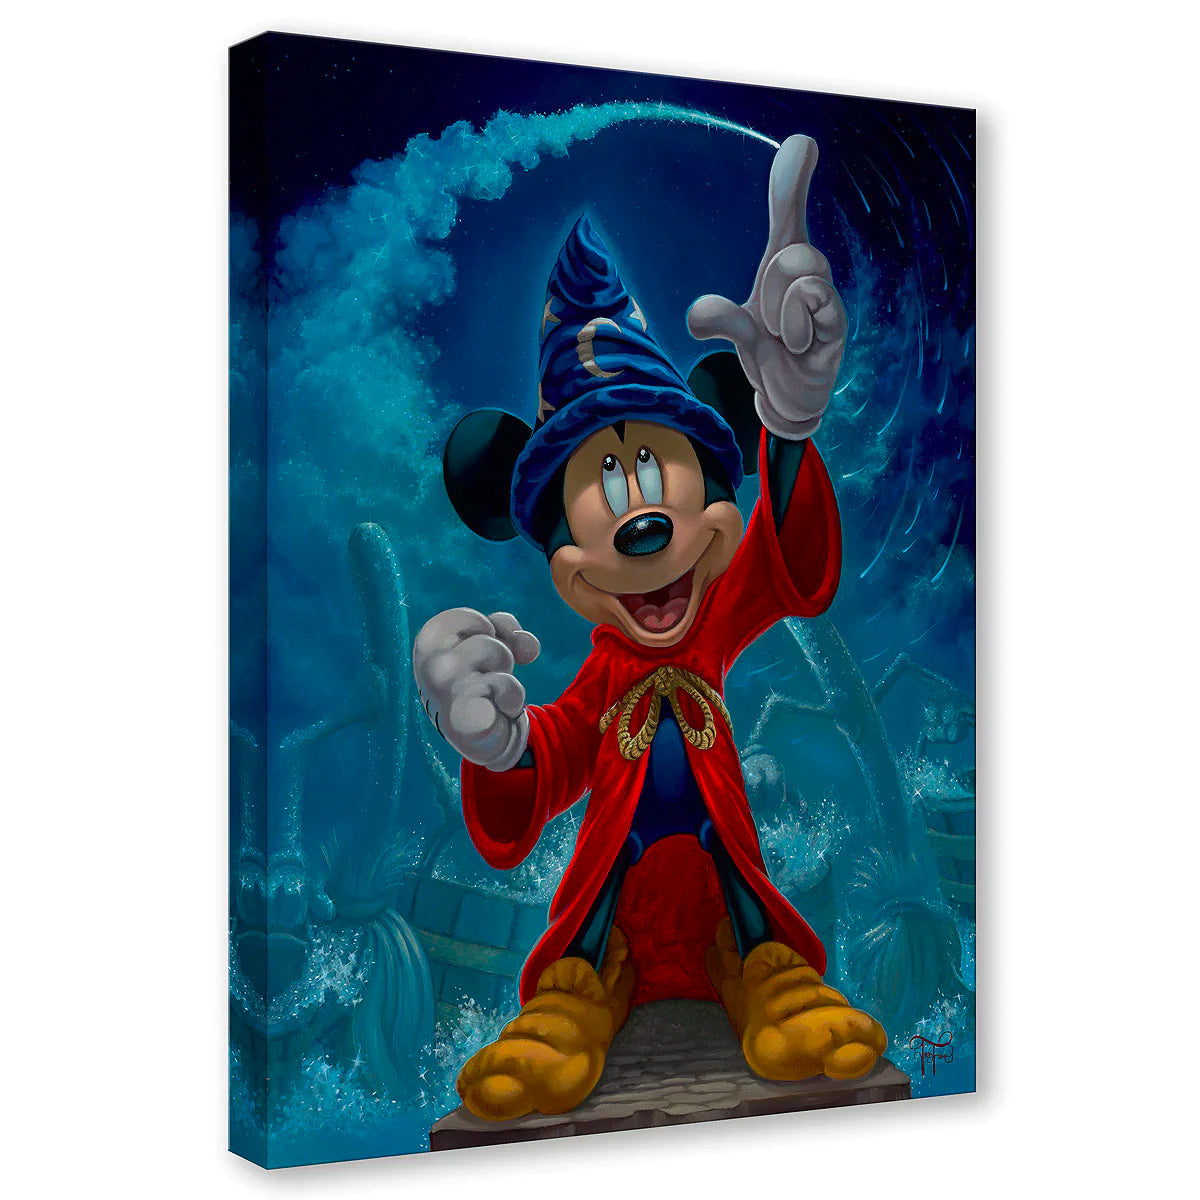 Jared Franco Disney "Casting Magic" Limited Edition Canvas Giclee